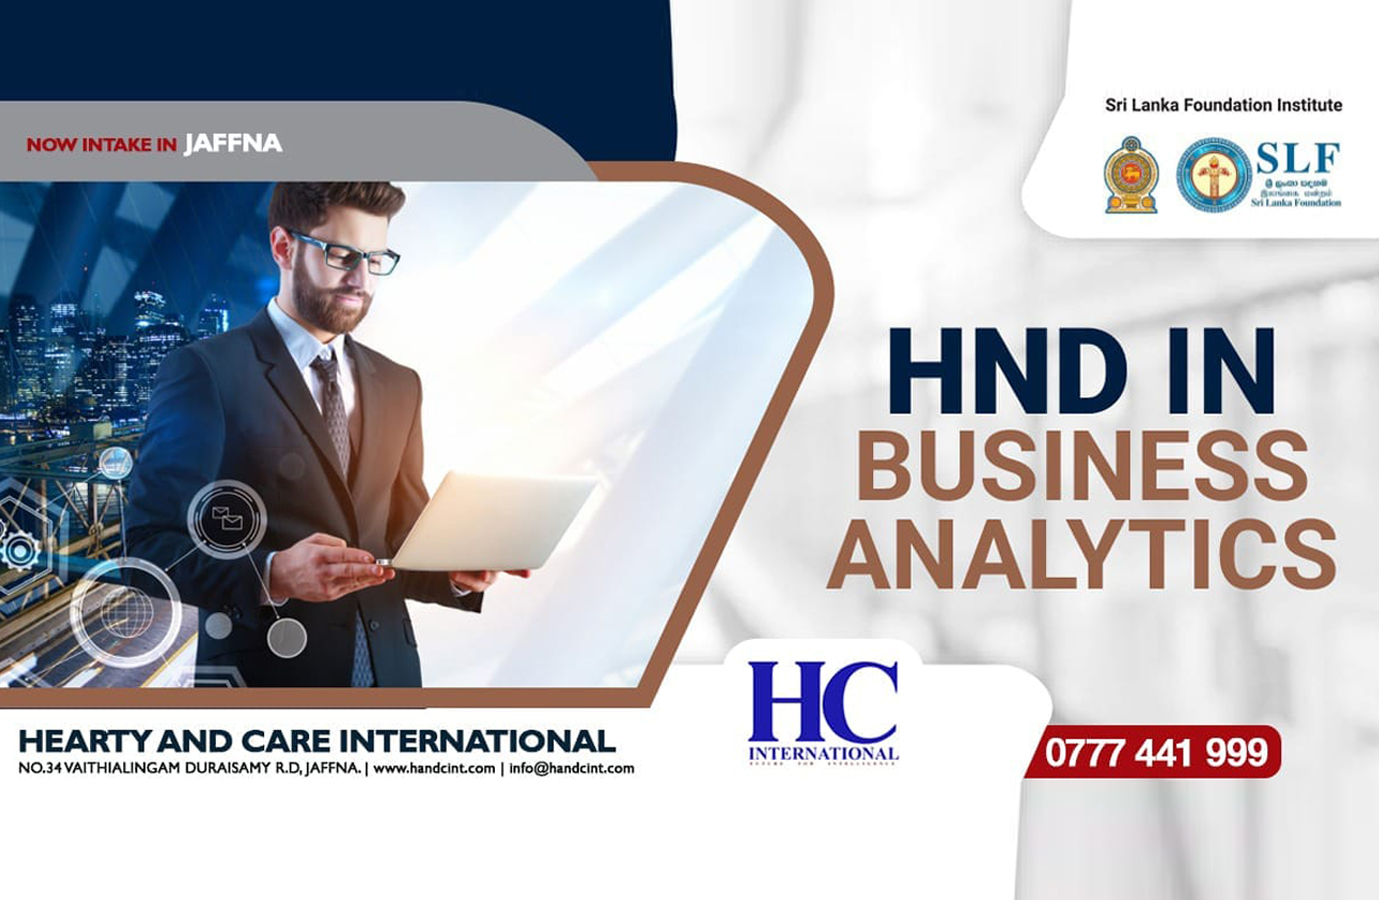 HND in Business Analytics - Hearty & Care International